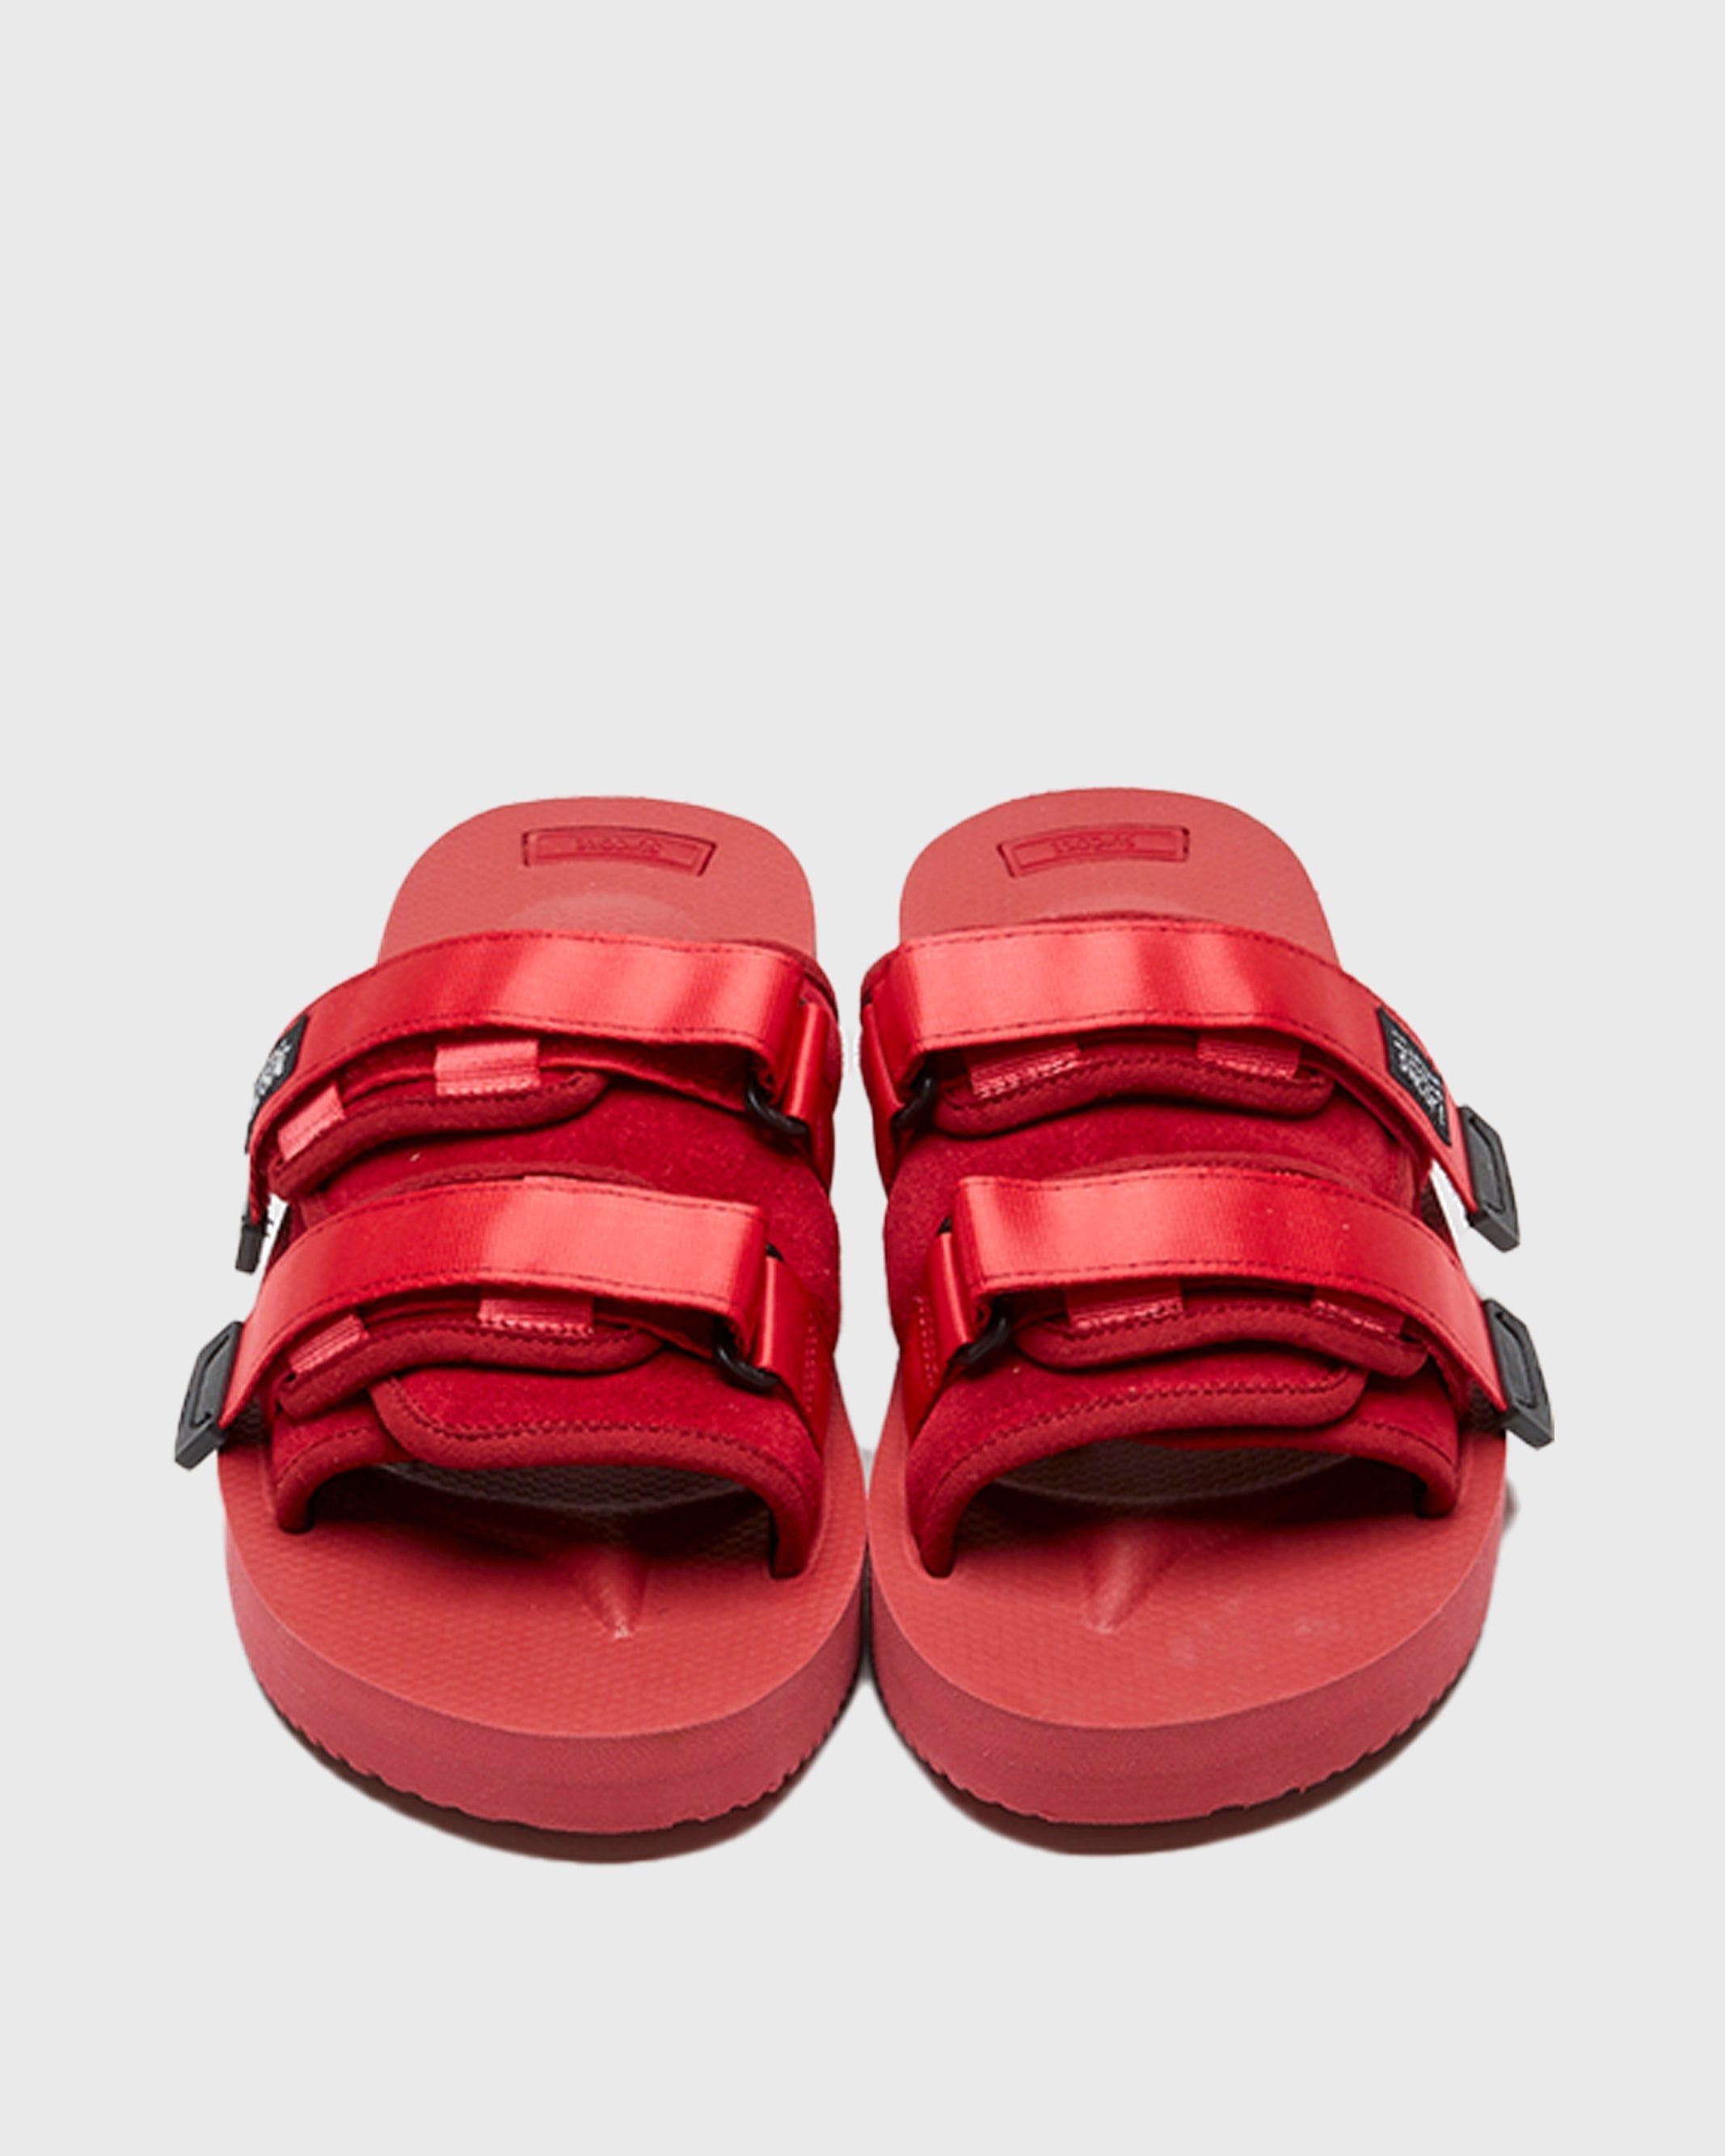 SUICOKE MOTO-VS in Red OG-056VS | Shop from eightywingold an official brand partner for SUICOKE Canada and US.